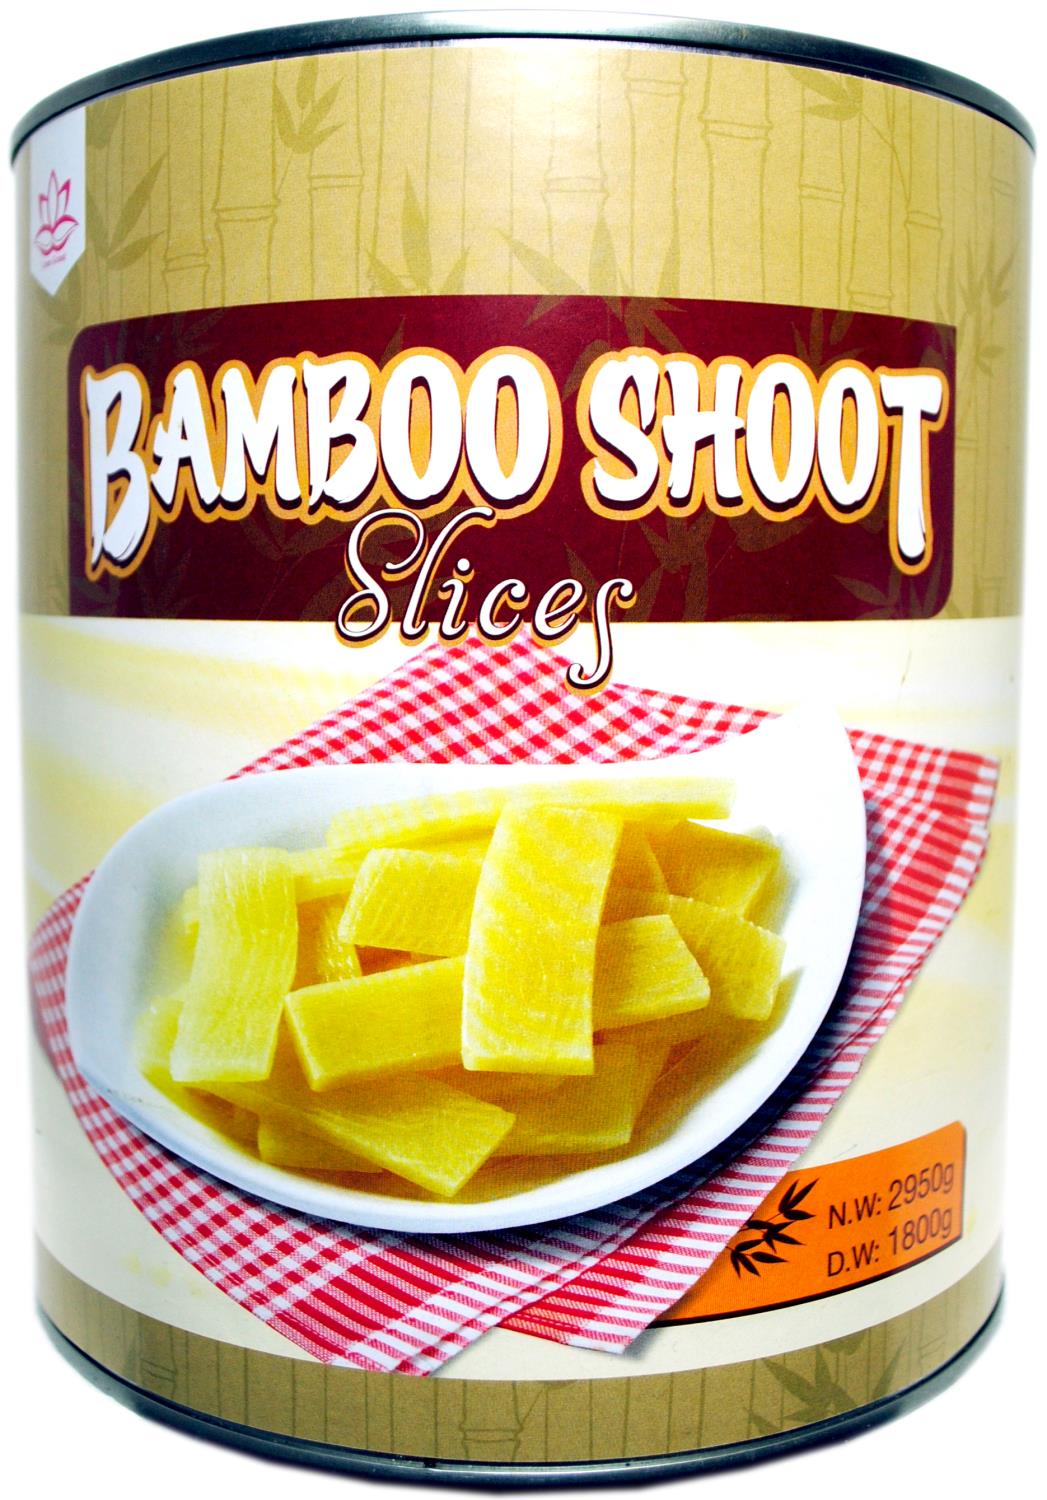 A-FOOD Bamboo shoots slices 3kg CN